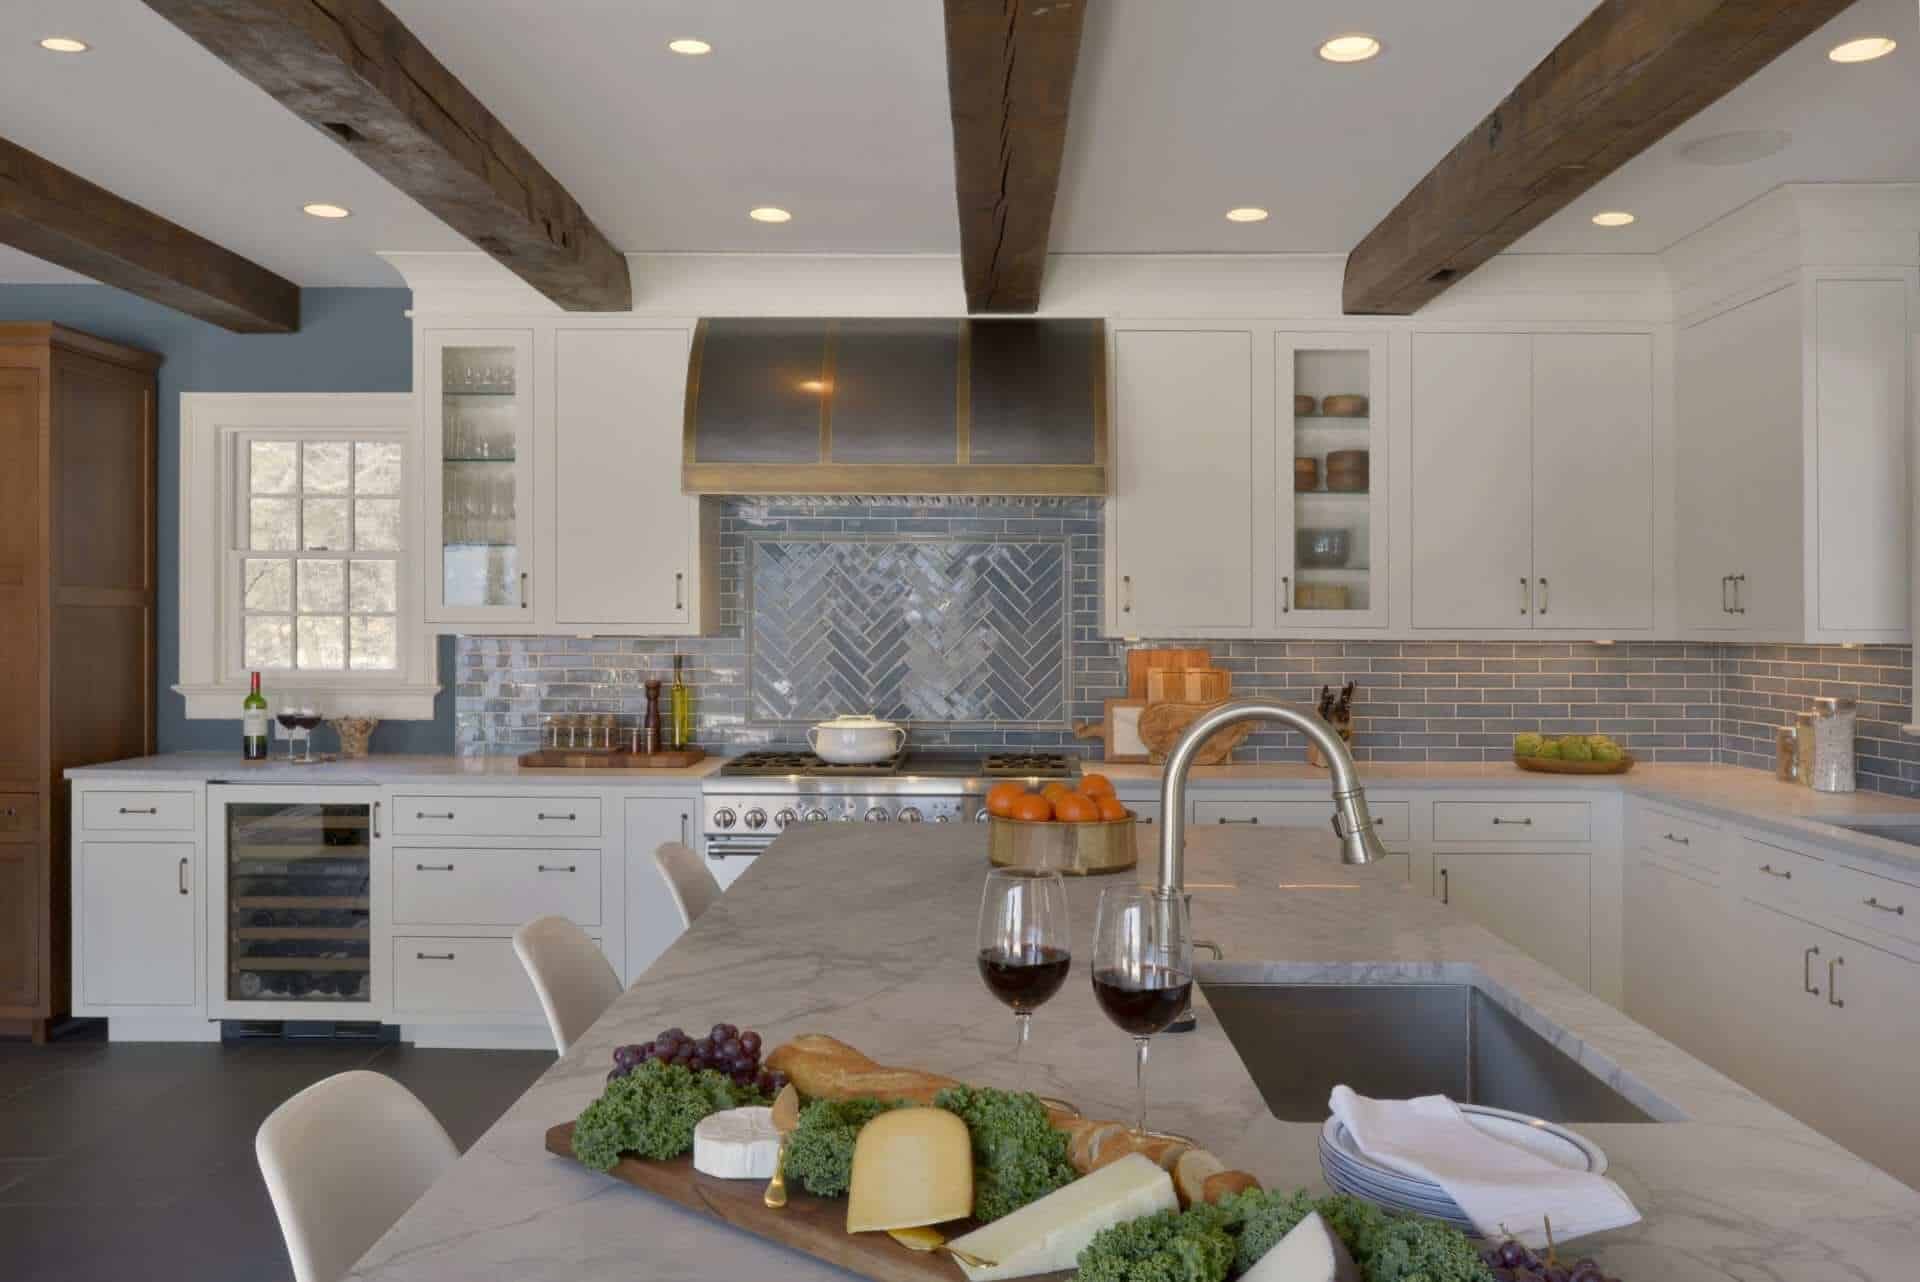 Transitional kitchen with exposed beams, white and oak Bilotta cabinets, ceramic tile backsplash and antique hood.